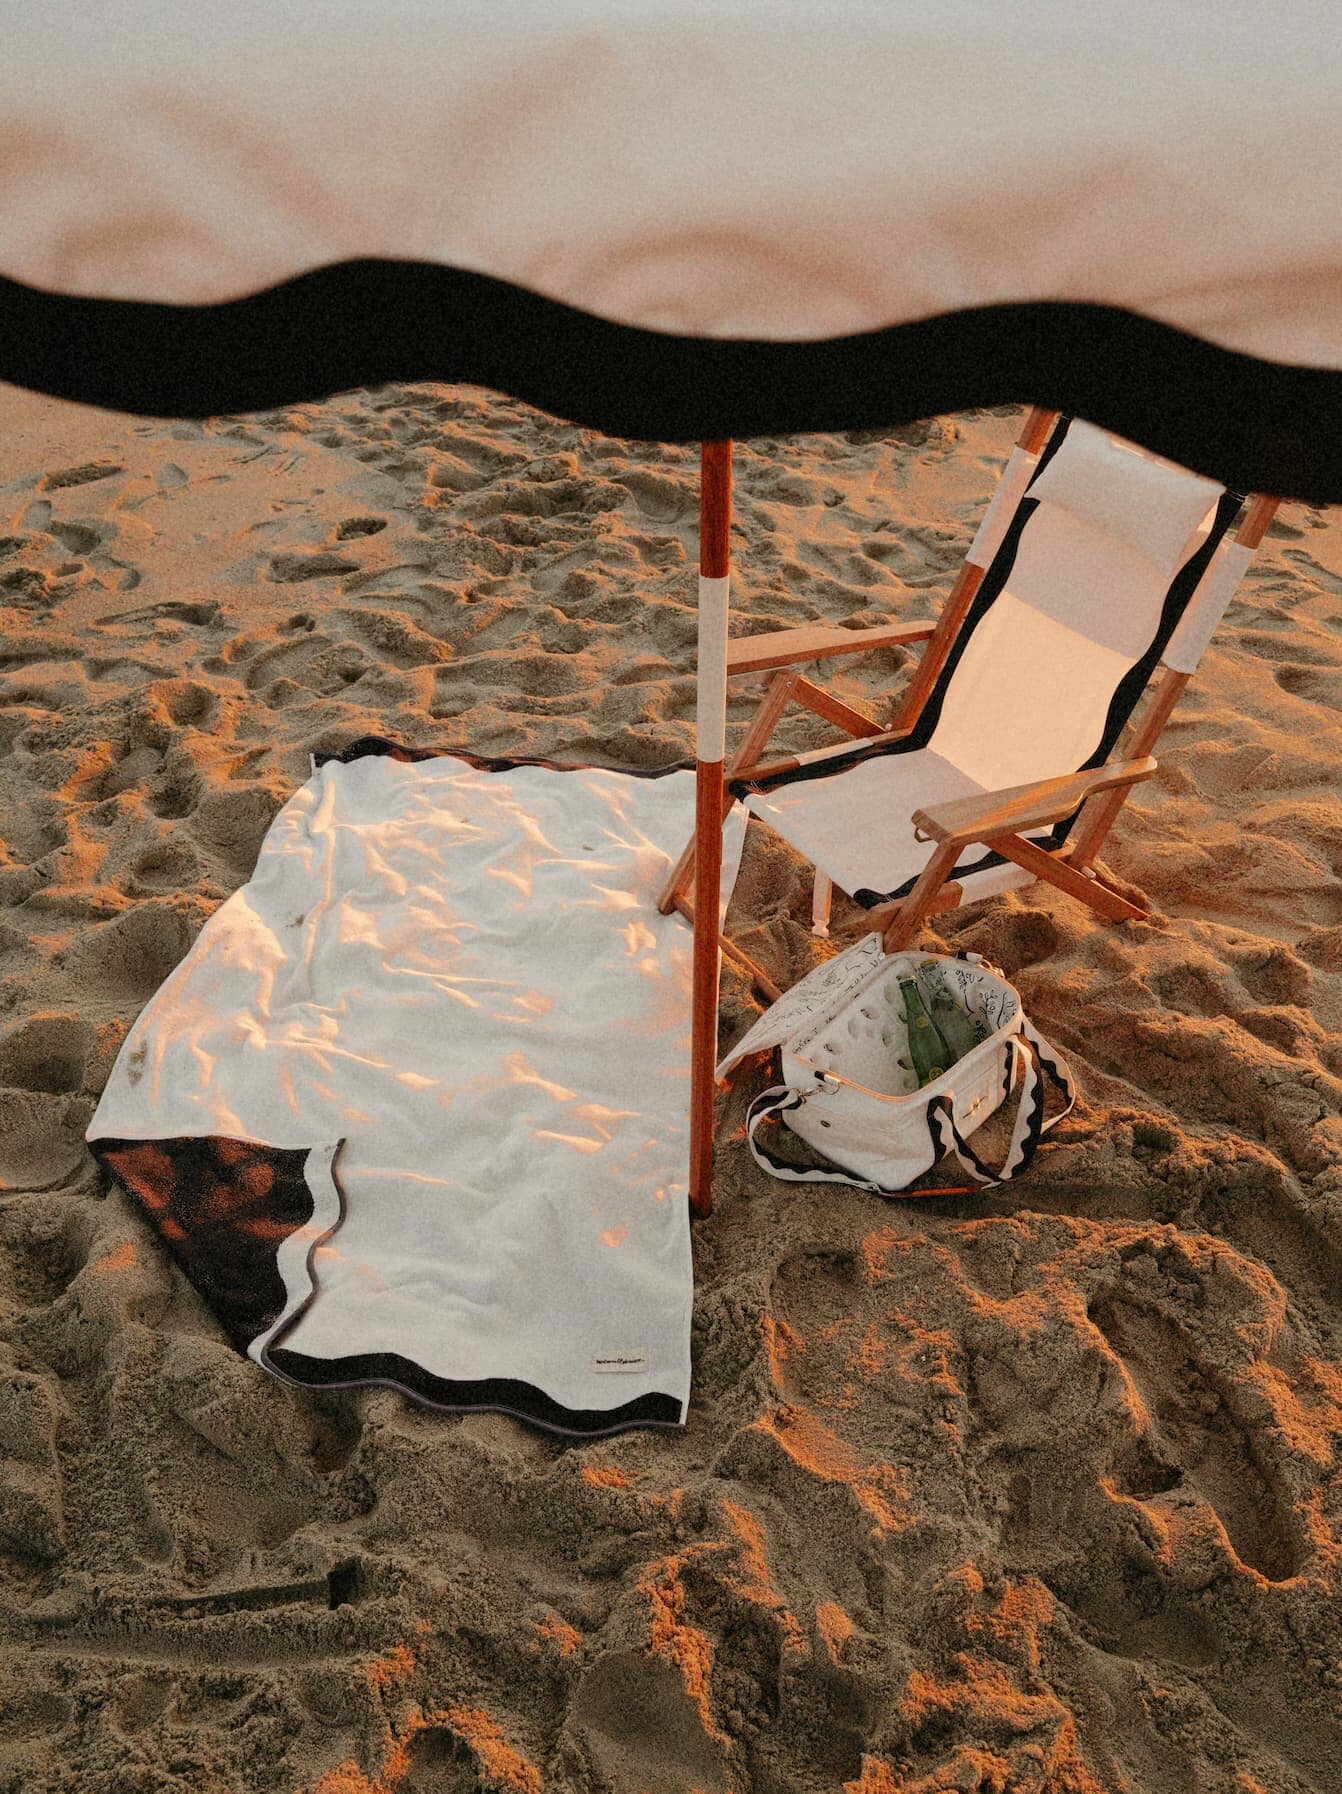 Beach setting with Riviera White umbrella, chair, towel & cooler